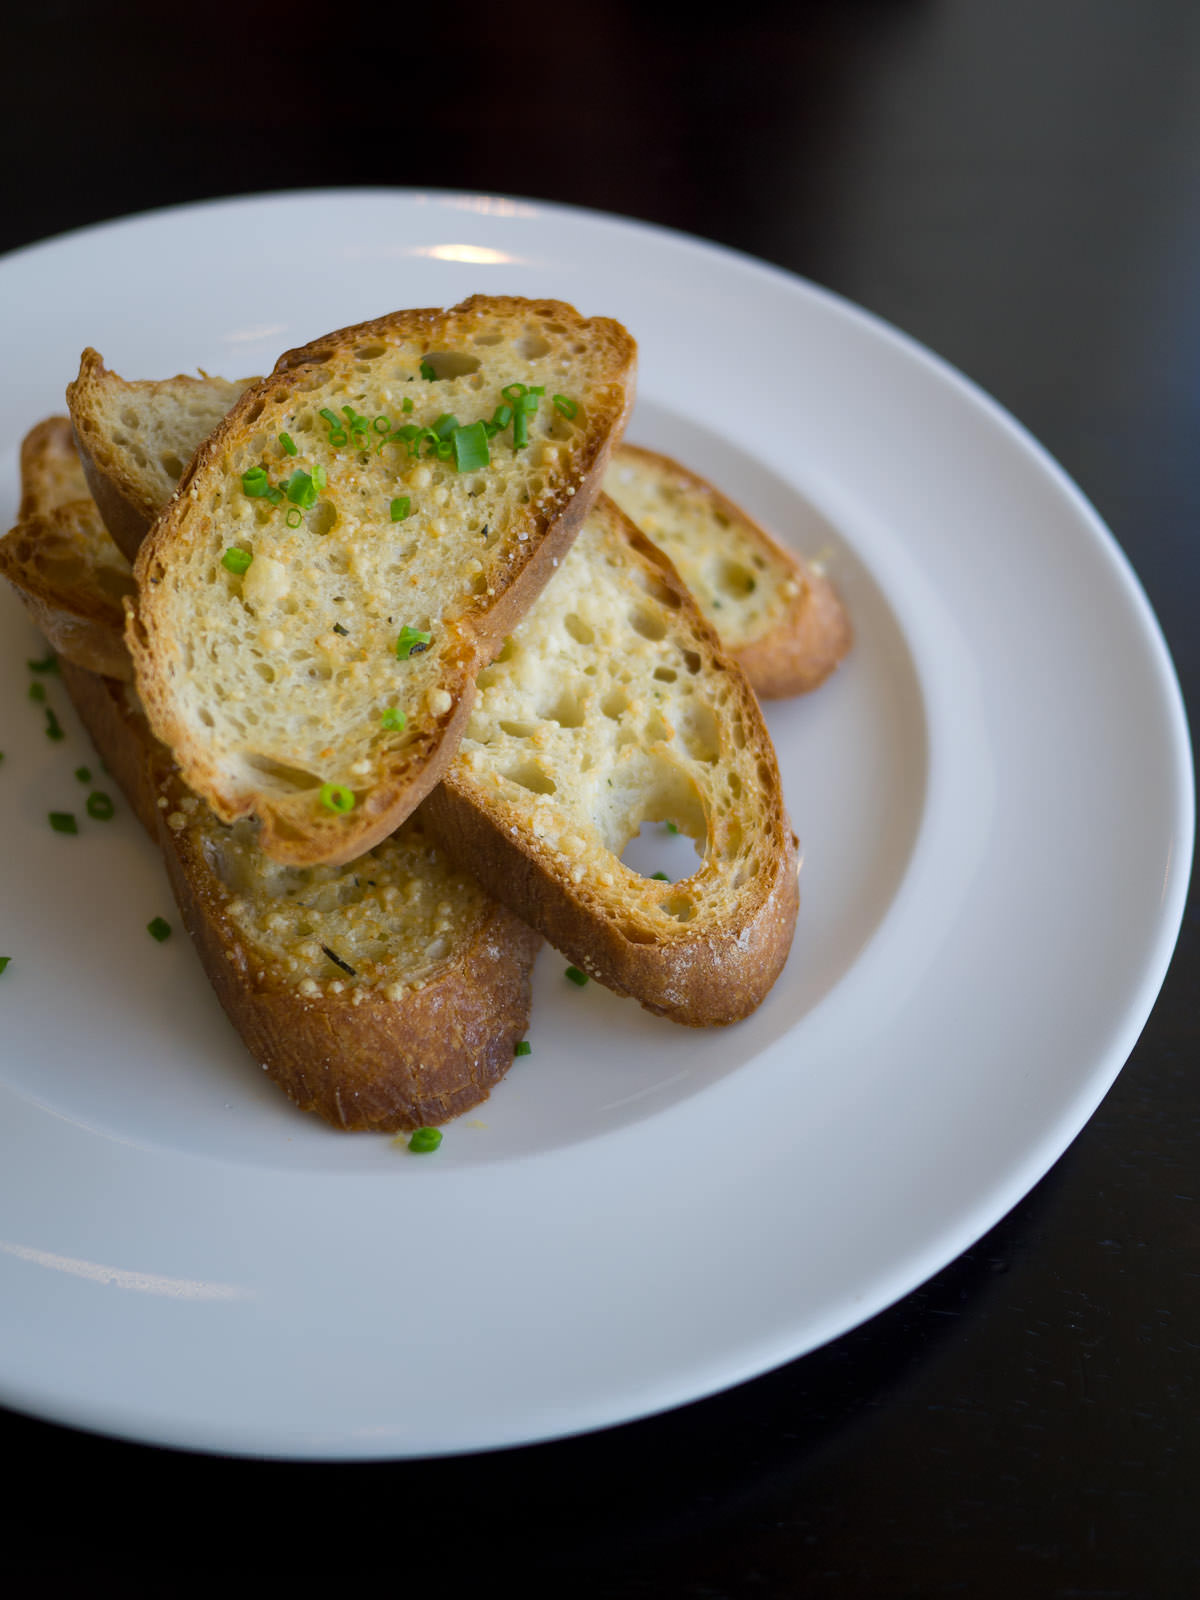 Oven-baked garlic, parsley and parmesan bread (AU$7.80)